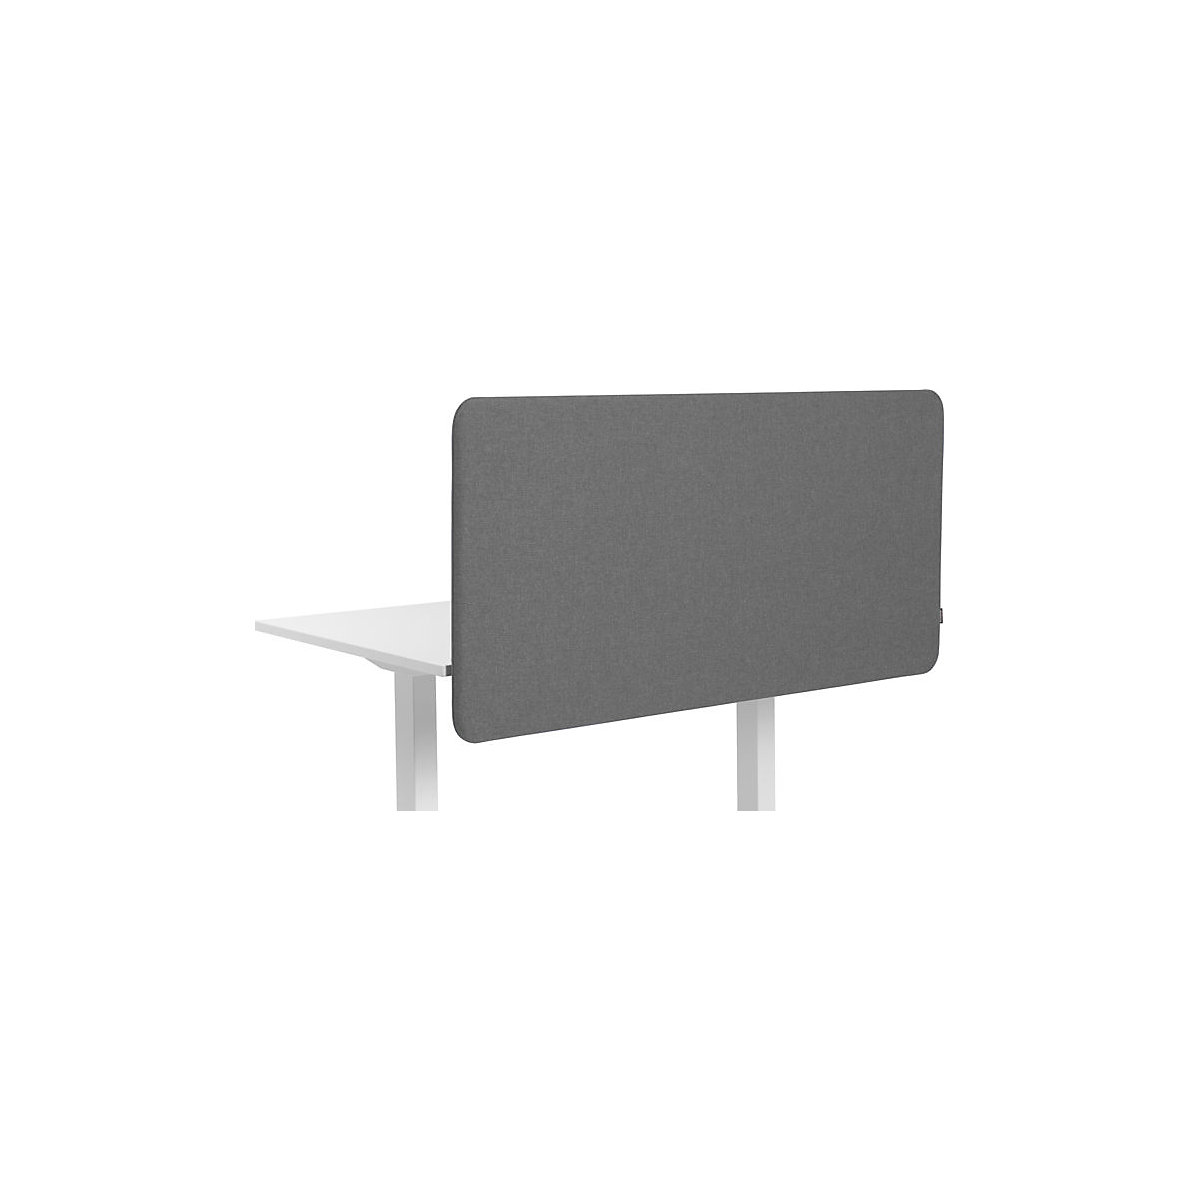 Softline Salsa acoustic desk partition, suspended downwards, HxW 650 x 1800 mm, fabric, grey-2